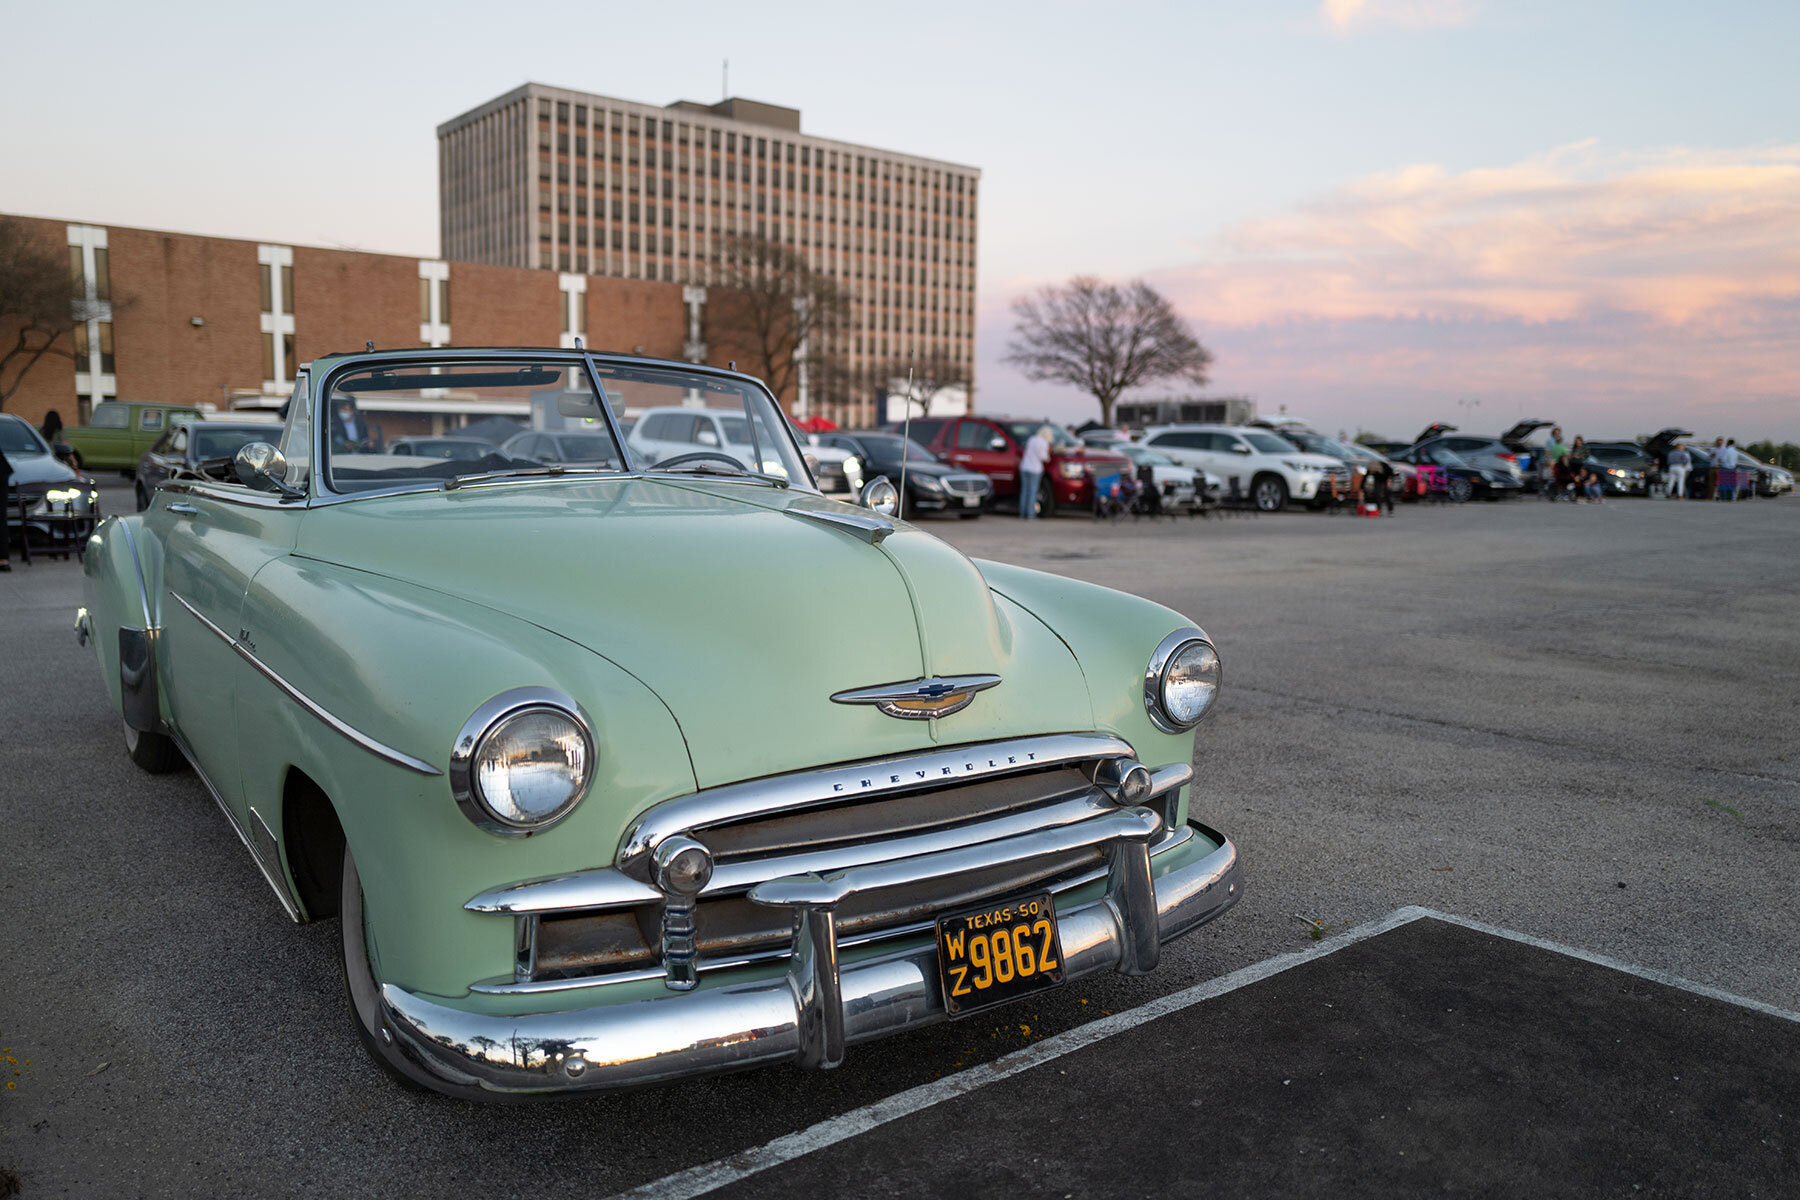  Steve Curry’s 1950 Chevrolet convertible was an attraction at the drive-in /  photo by Daniel Ortiz  